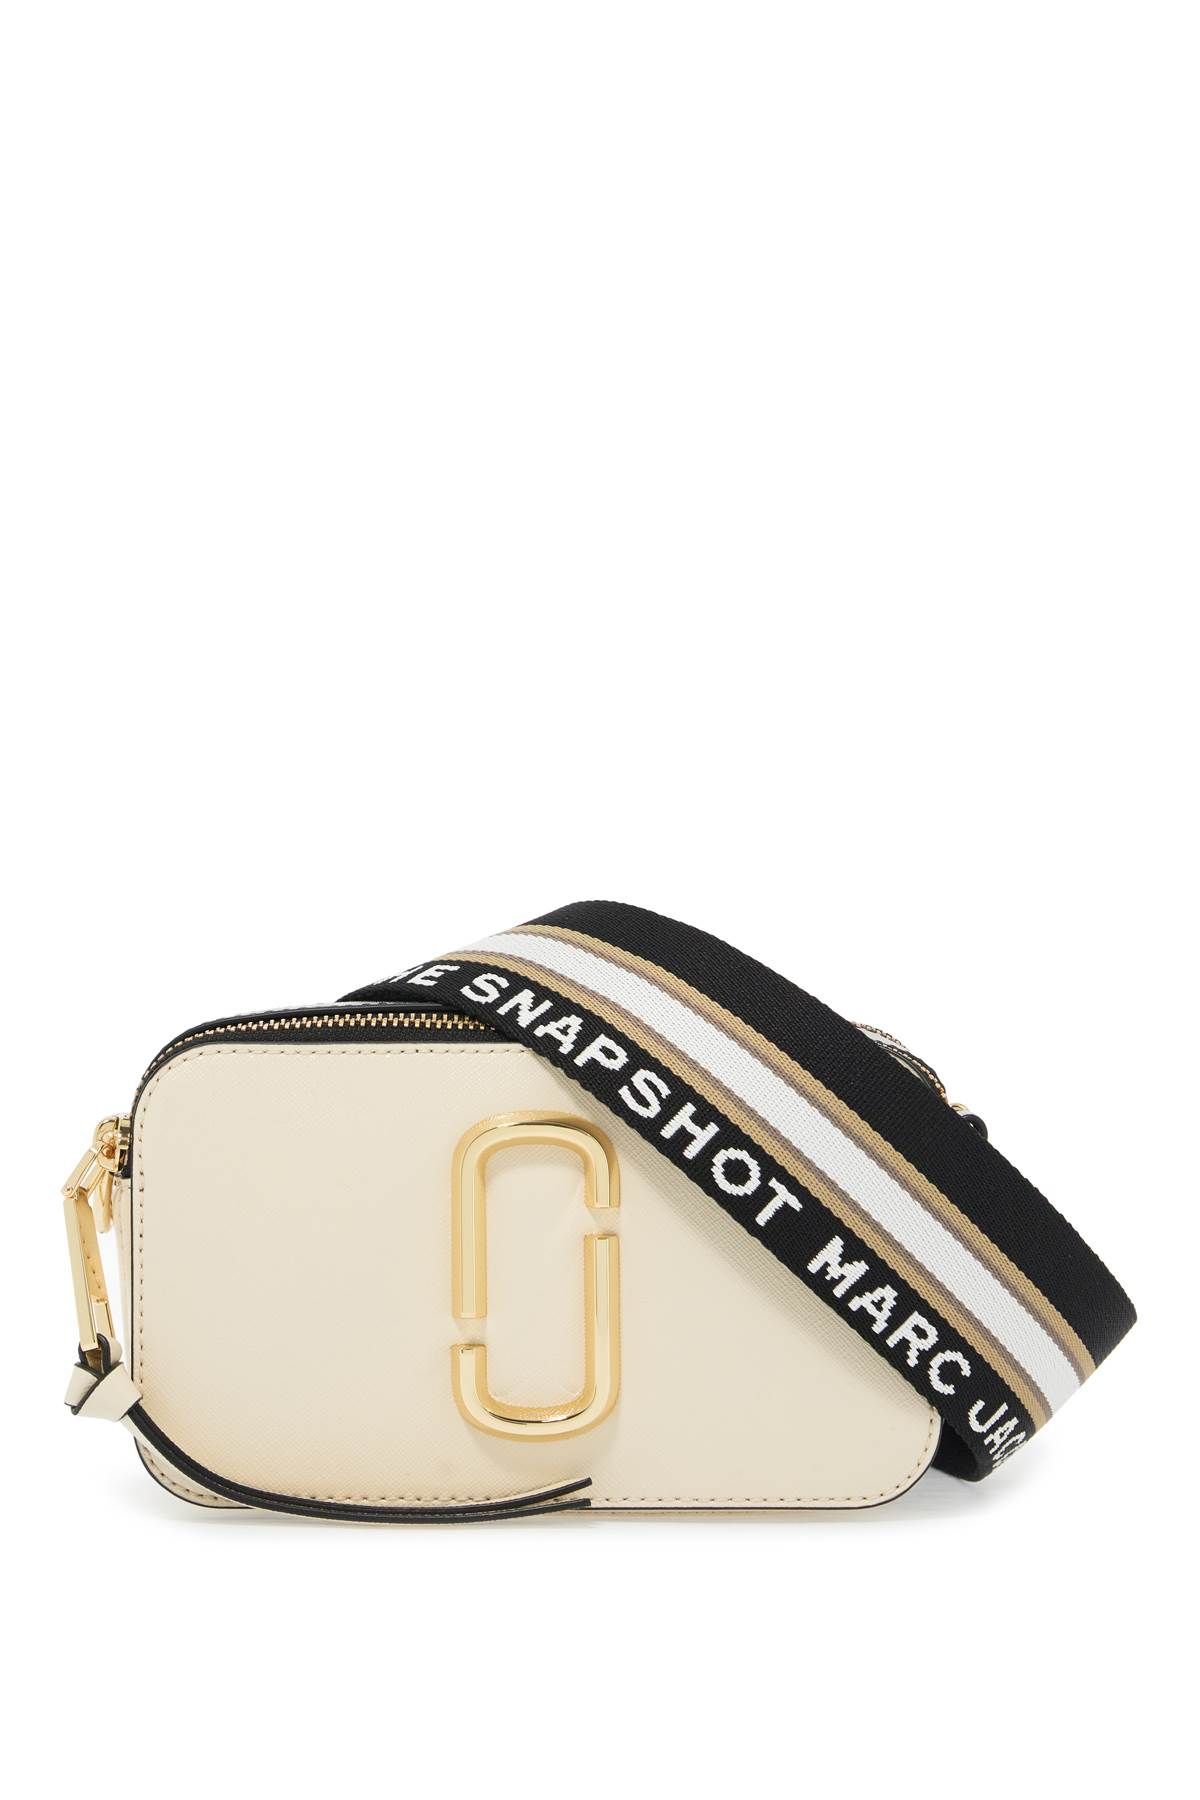 Marc Jacobs MARC JACOBS the snapshot camer bag